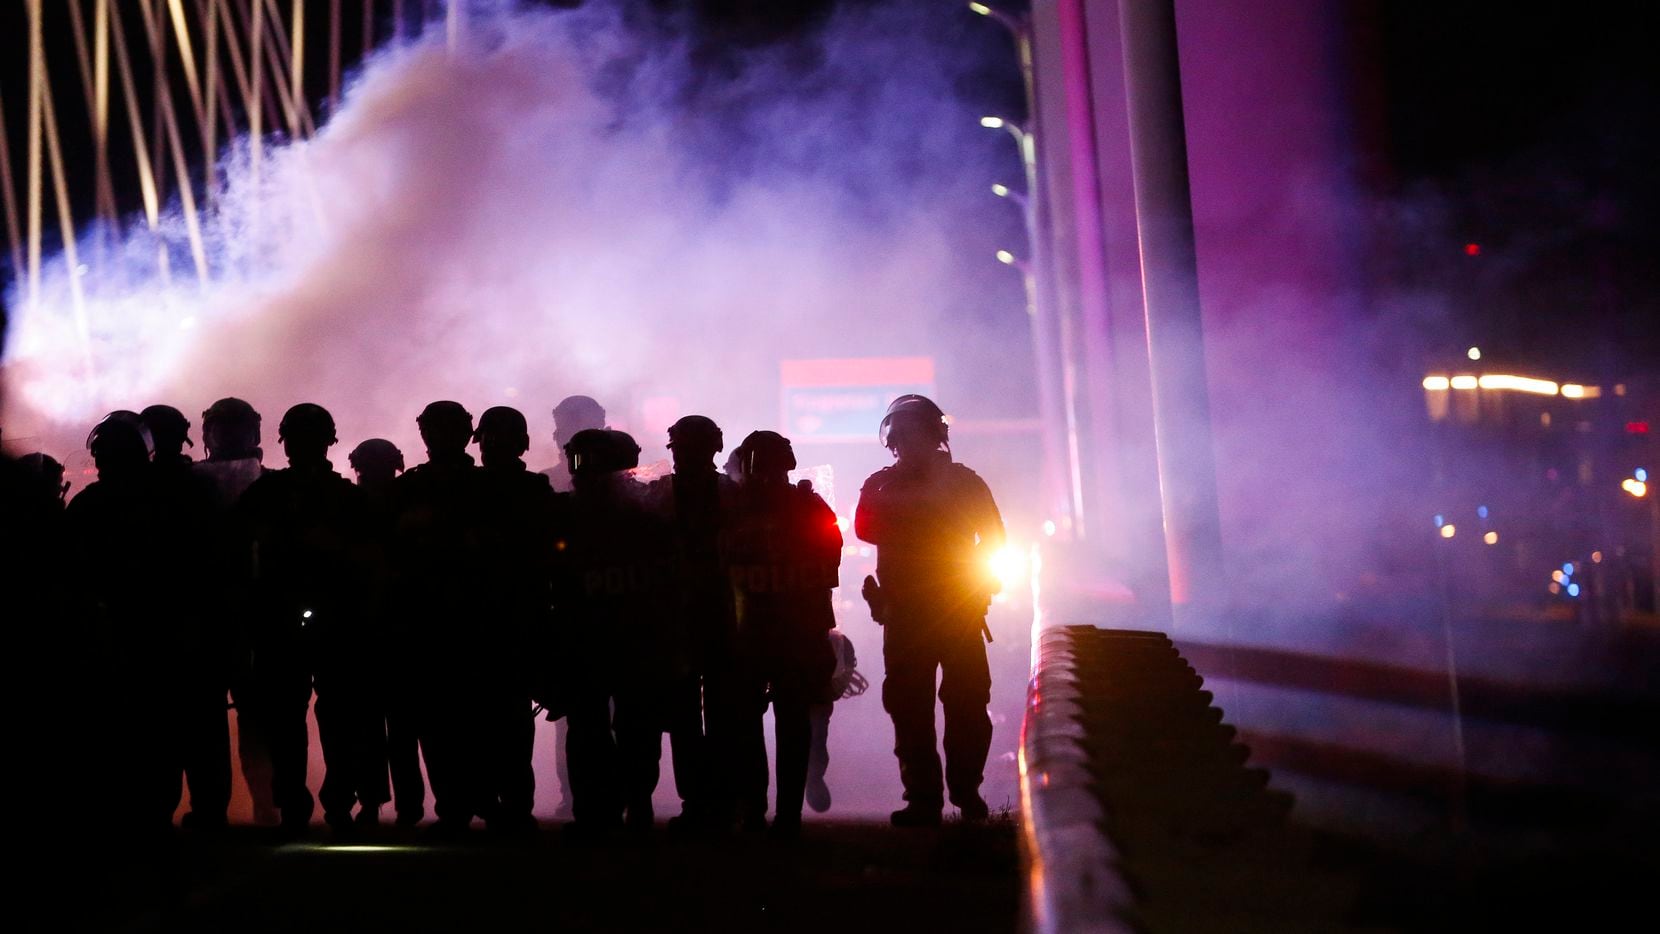 Police deploy crowd control chemical agents as they surround protesters who marched onto the...